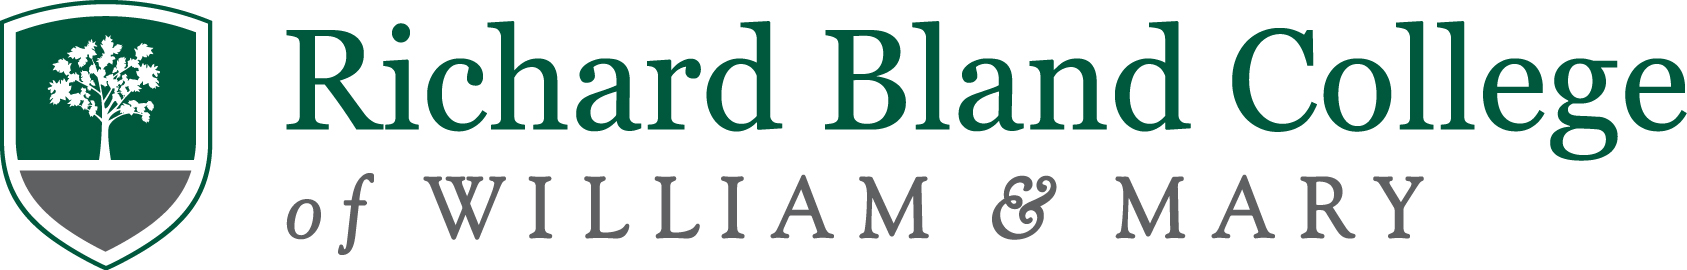 Richard Bland College of William and Mary logo